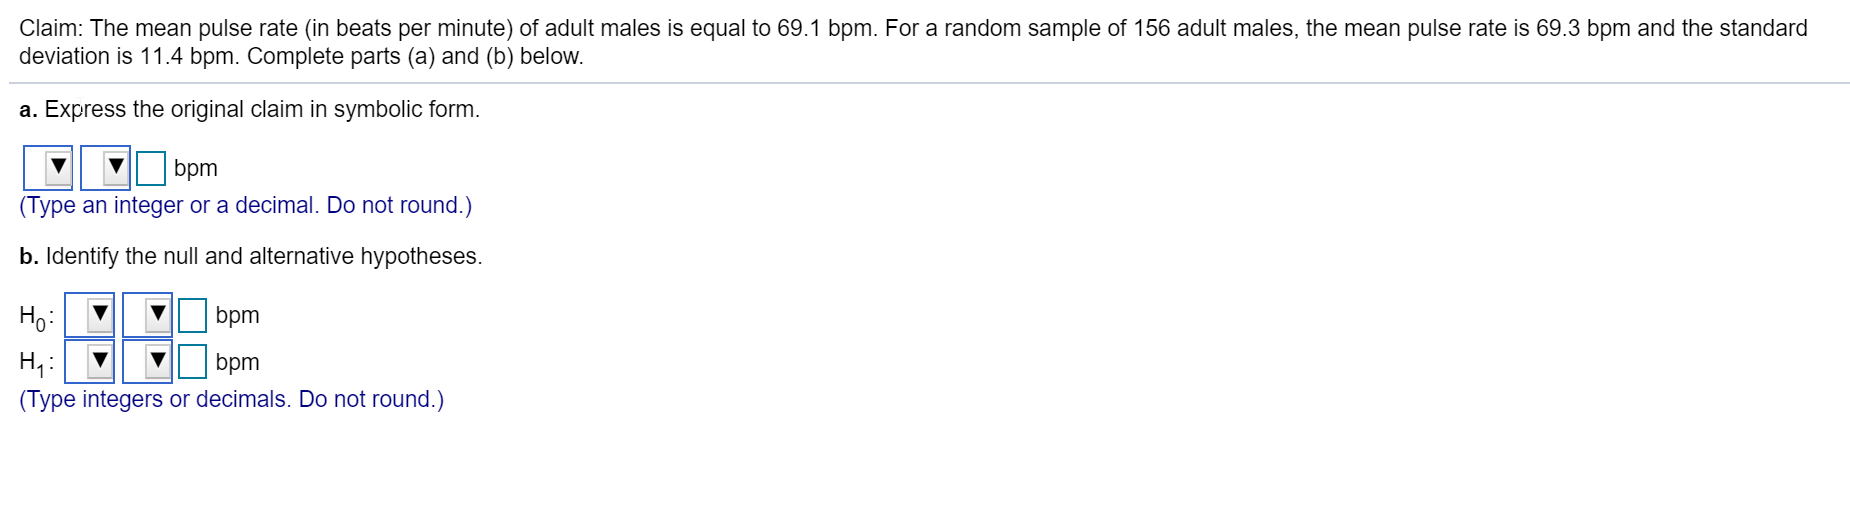 Claim: The mean pulse rate (in beats per minute) of adult males is equal to 69.1 bpm. For a random sample of 156 adult males, the mean pulse rate is 69.3 bpm and the standard
deviation is 11.4 bpm. Complete parts (a) and (b) below.
a. Express the original claim in symbolic form.
bpm
(Type an integer or a decimal. Do not round.)
b. Identify the null and alternative hypotheses.
Ho:
bpm
bpm
(Type integers or decimals. Do not round.)
